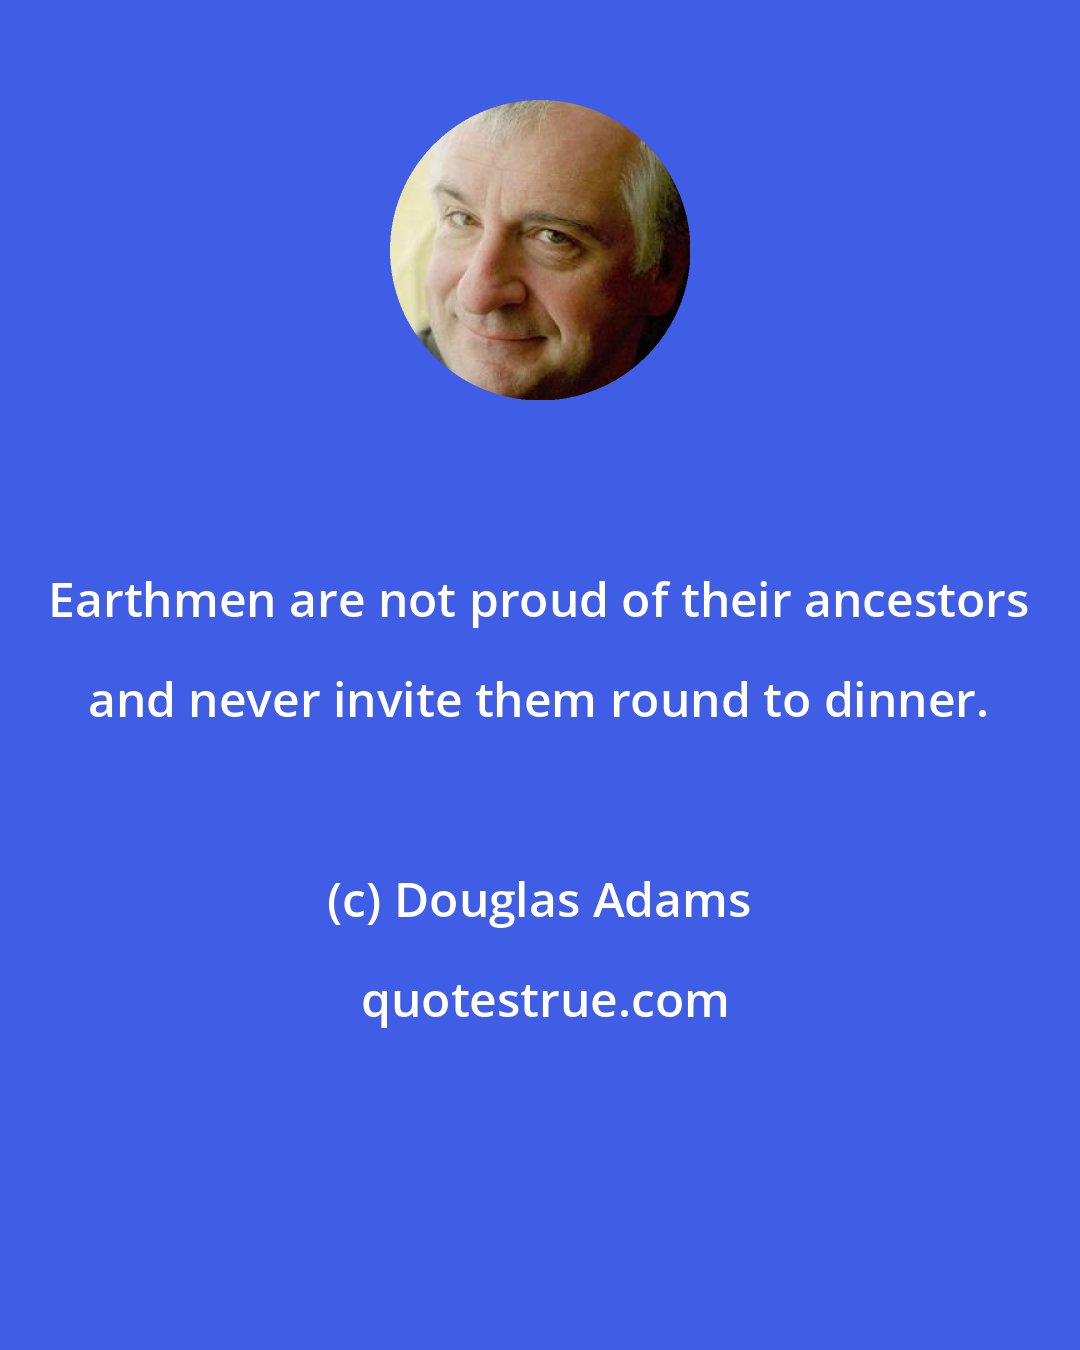 Douglas Adams: Earthmen are not proud of their ancestors and never invite them round to dinner.